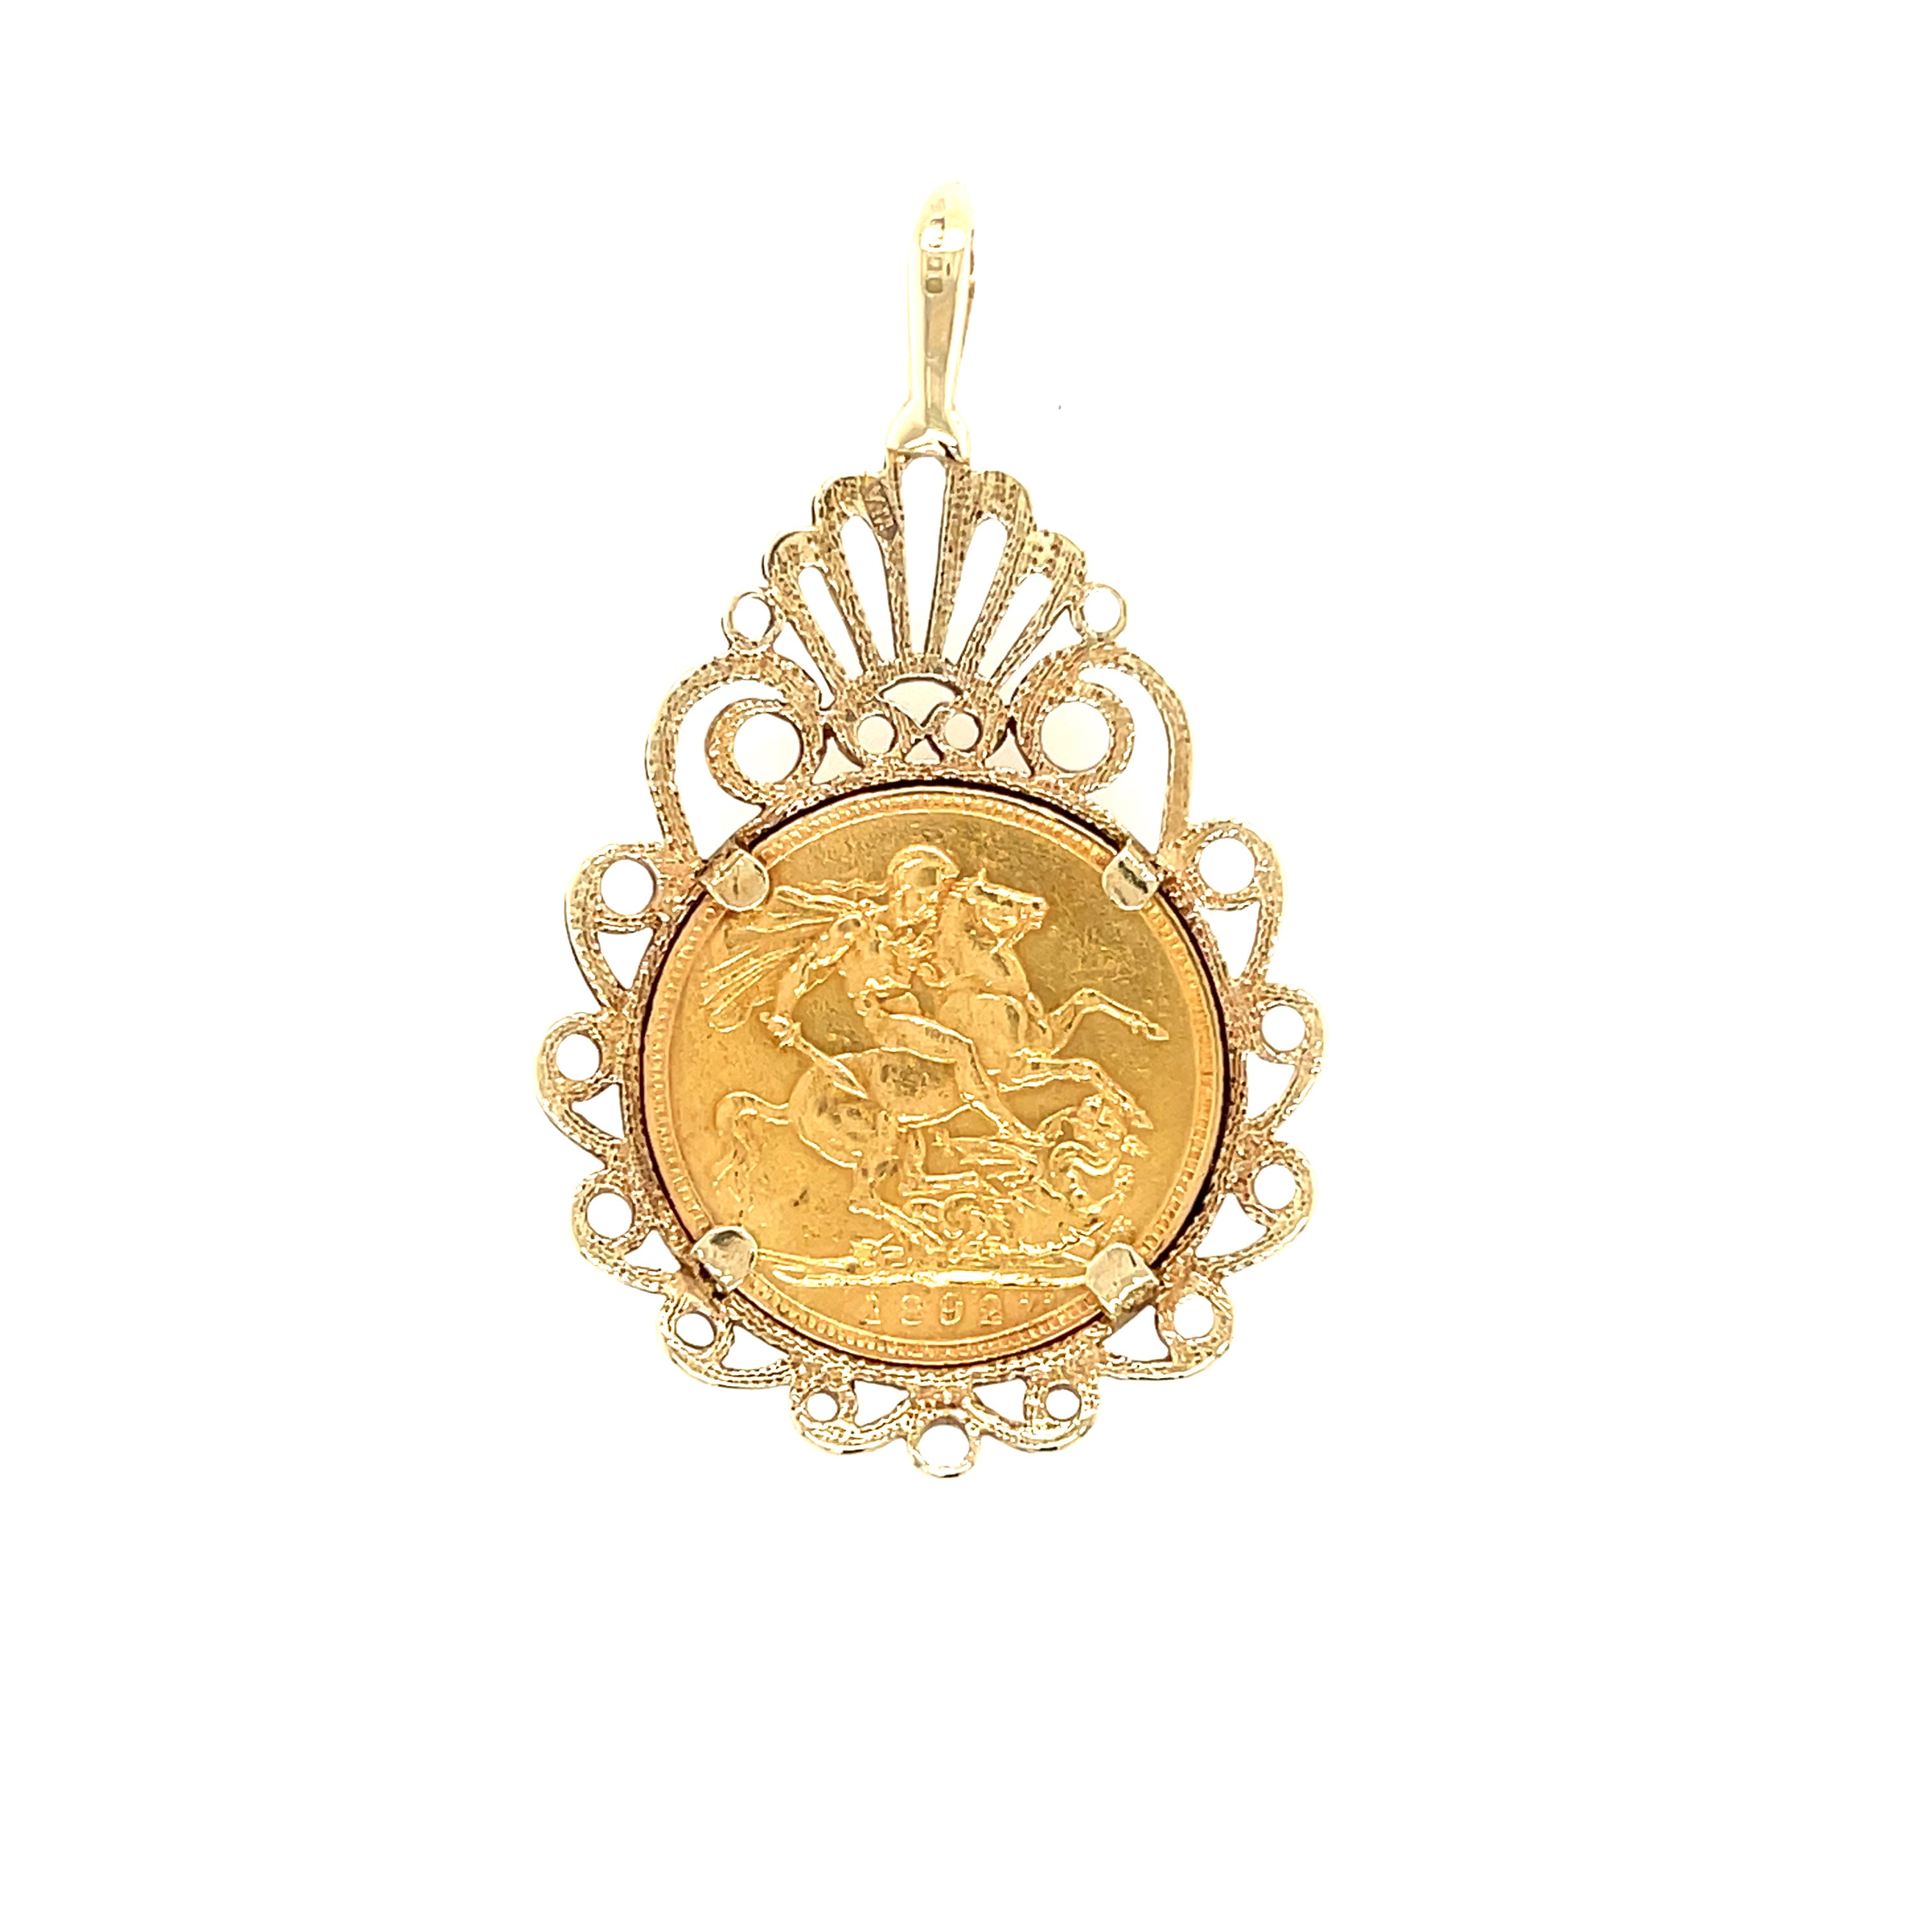 1892 Queen Victoria Full Sovereign Coin & Ornate Pendant Mount SOLD